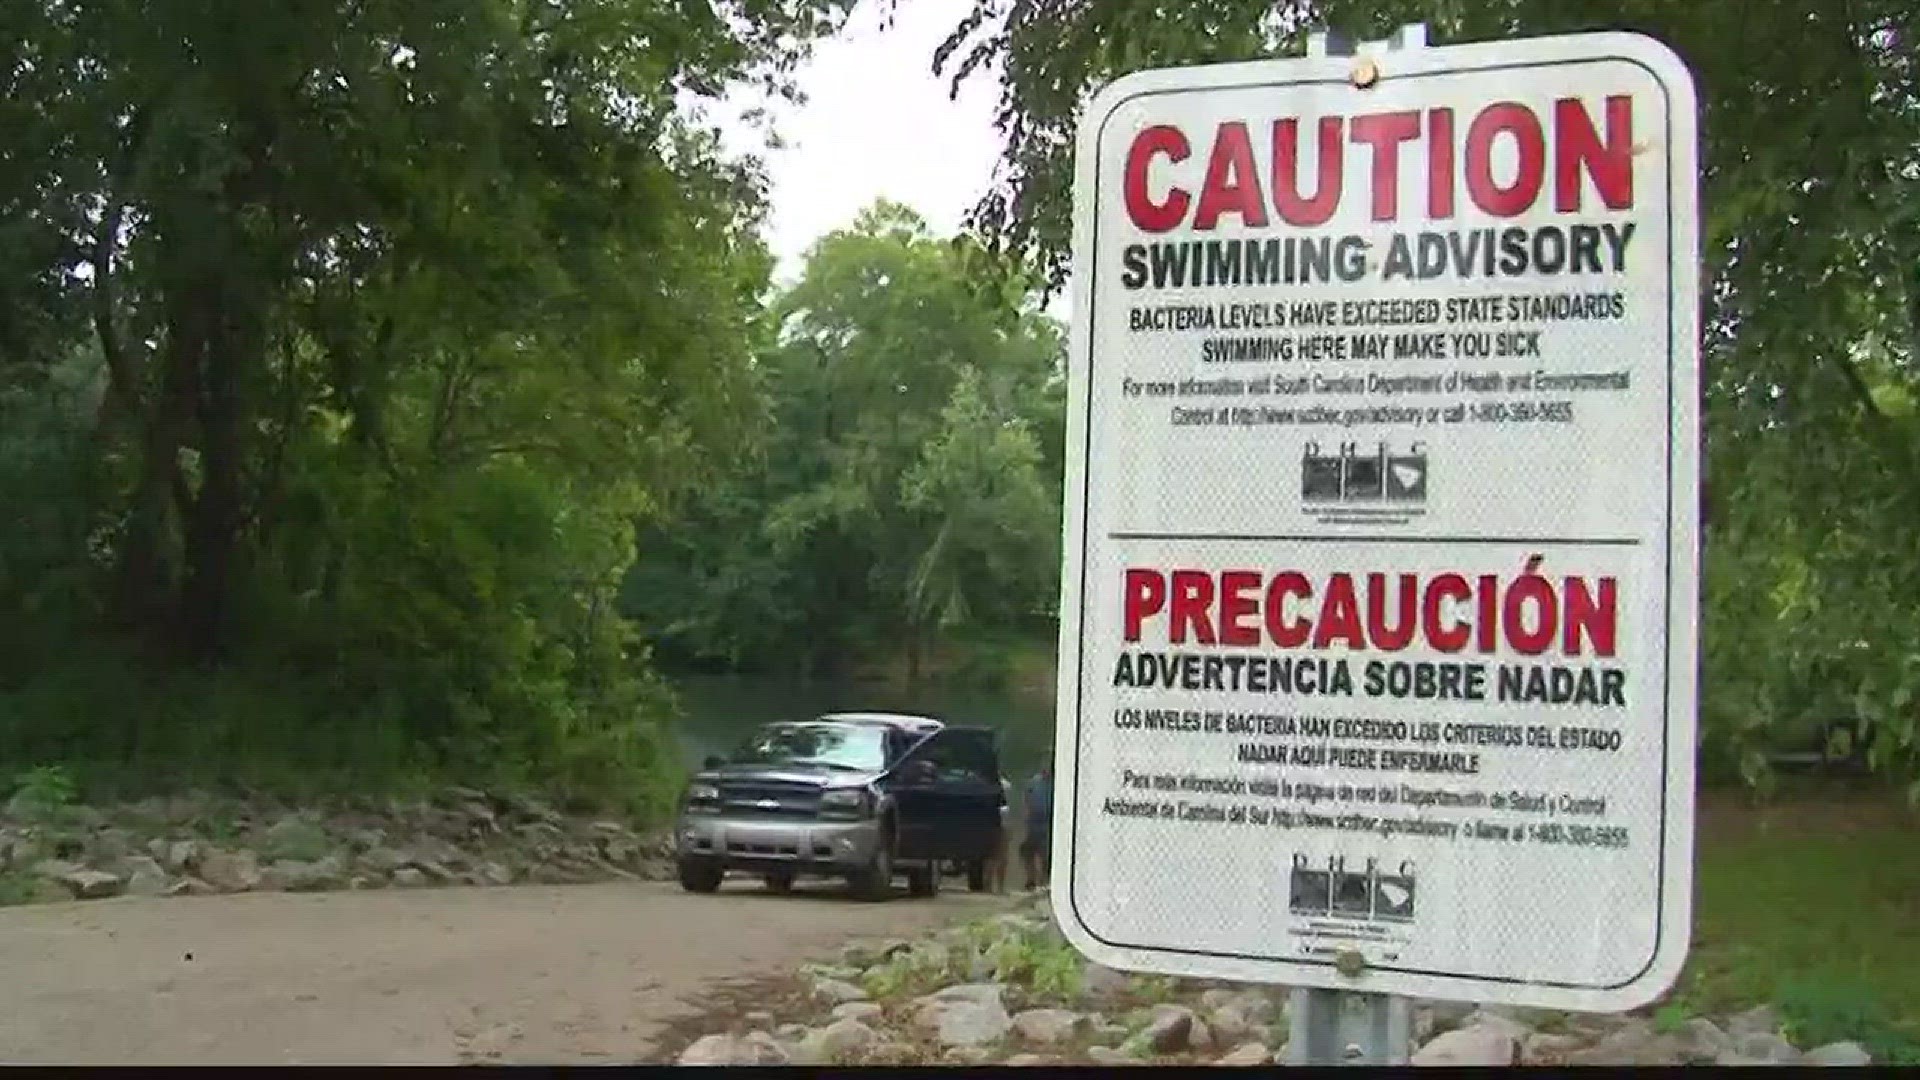 DHEC is warning people not to swim in Saluda Shoals Park after finding high levels of bacteria in that section of the Saluda river	DHEC says bad conditions at the Carolina Water Service's Friarsgate plant may have contributed to the bacteria.